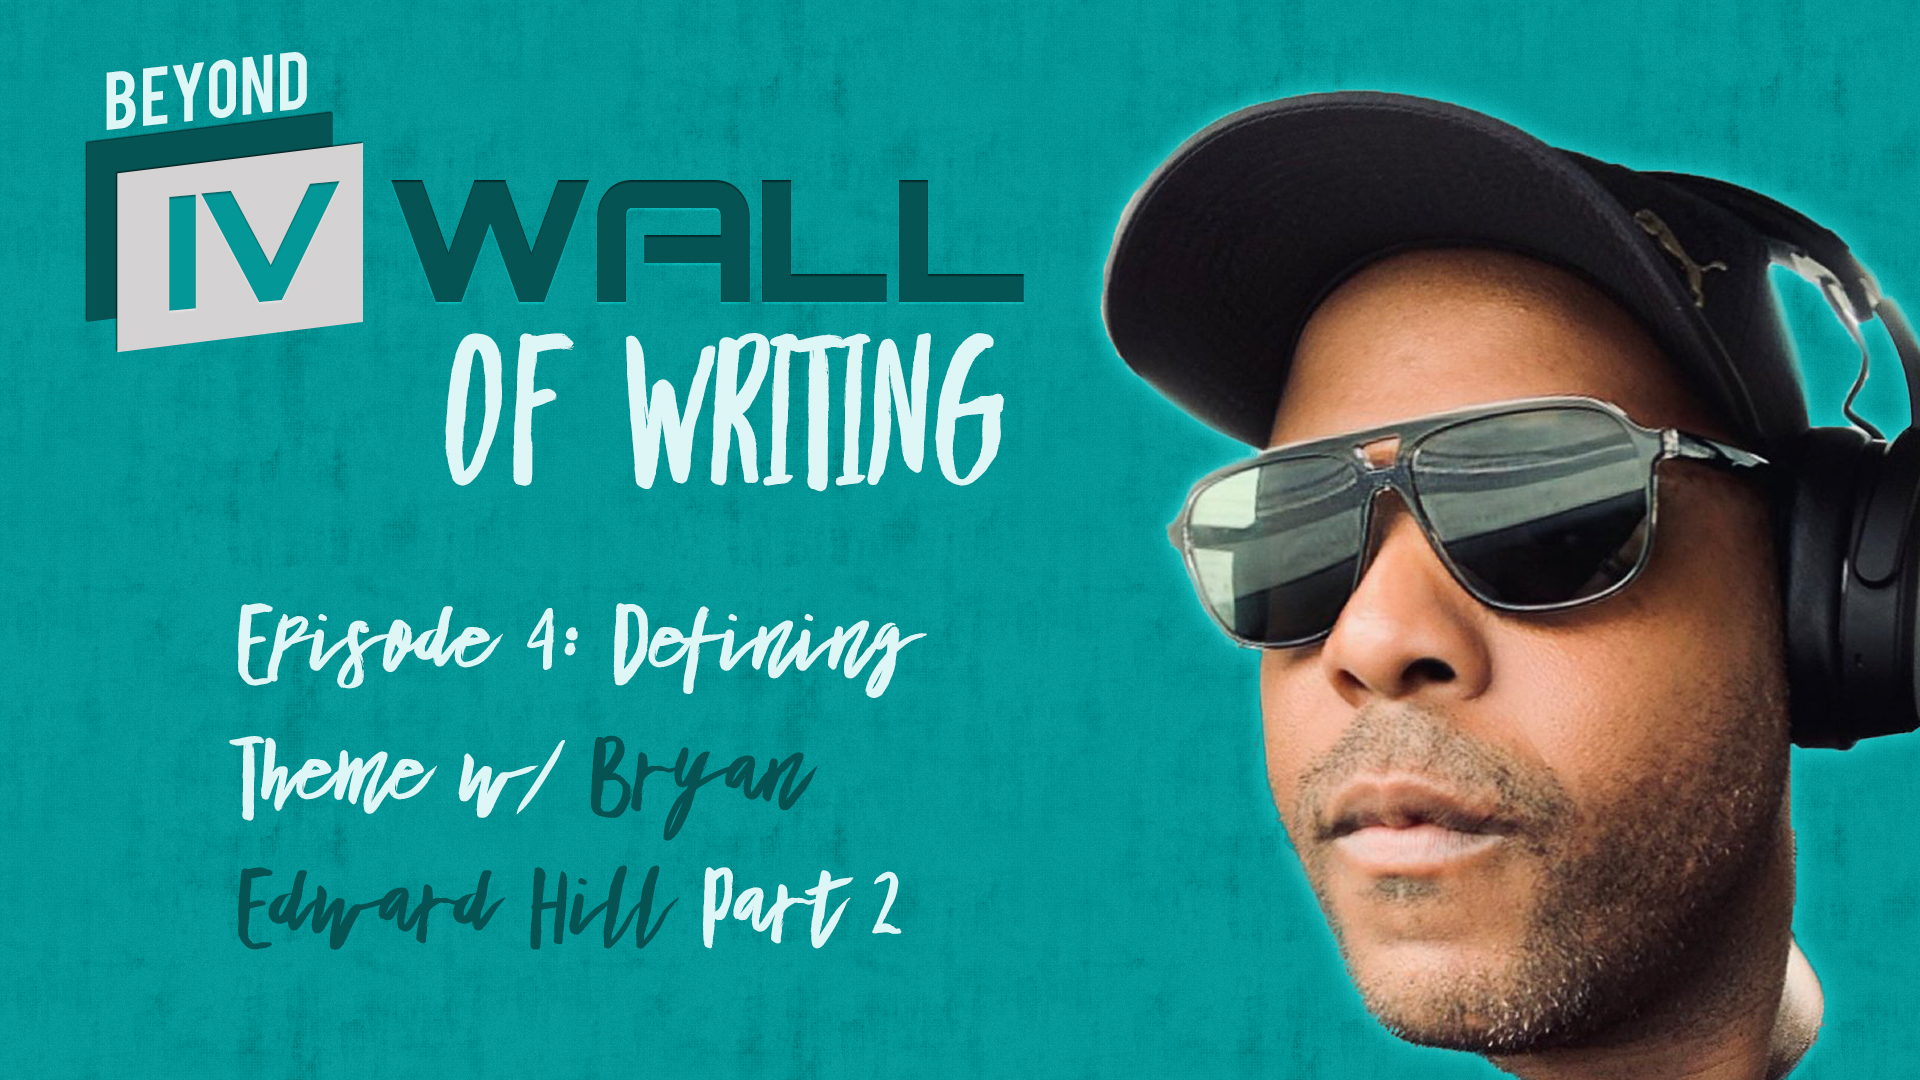 Beyond the IVWall of Writing: Episode 4- Defining Theme w/ Bryan Edward Hill, Part 2